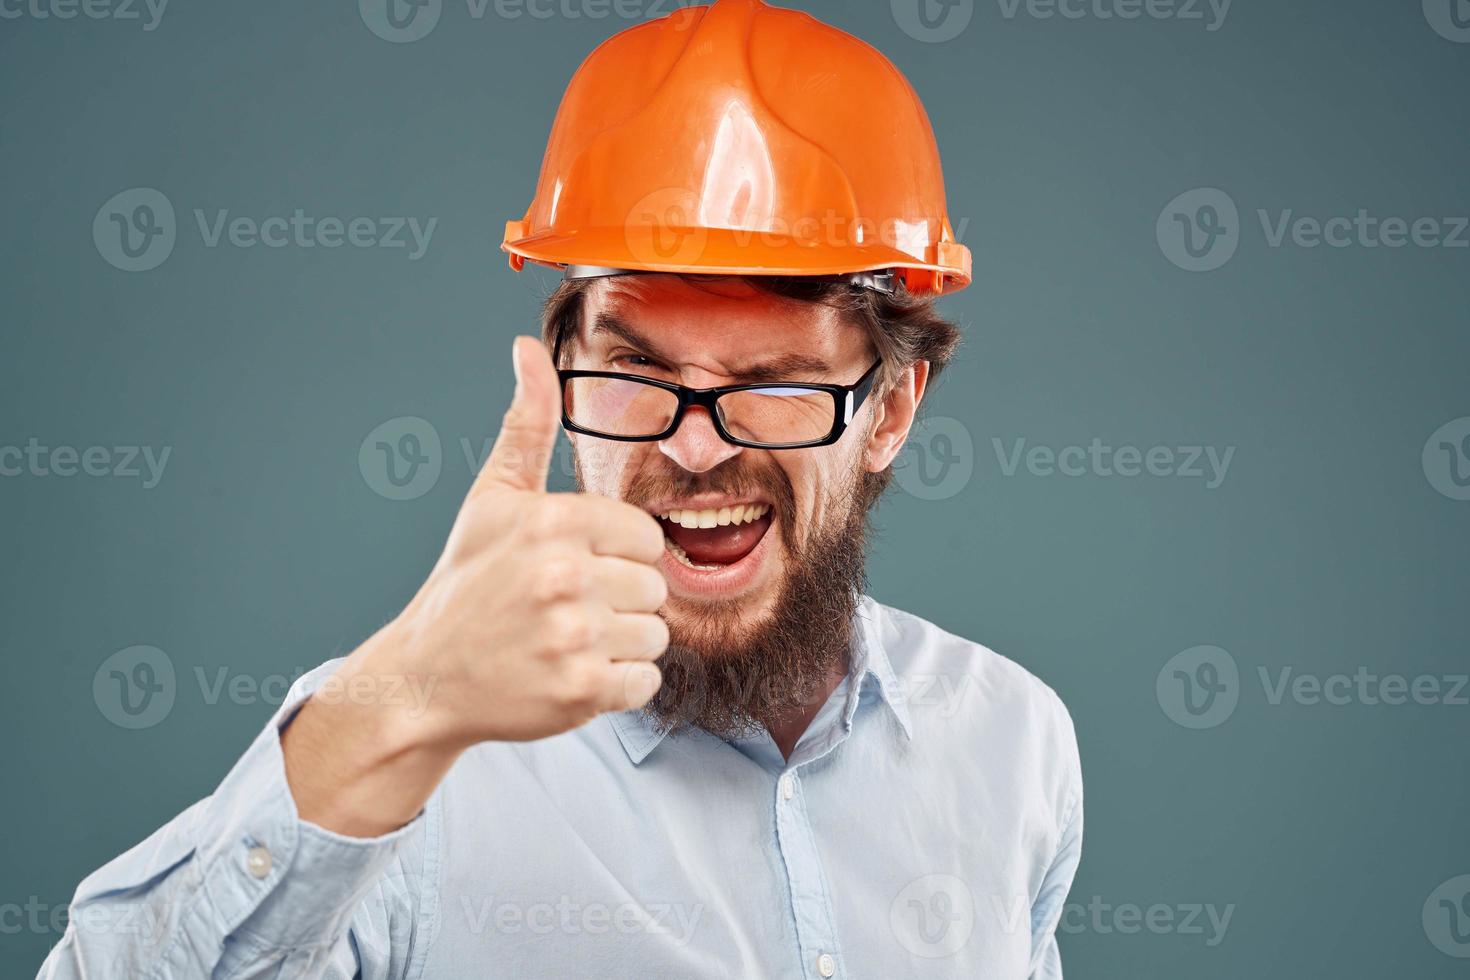 After wearing orange helmet shirt glasses hand gestures cropped view industry construction photo